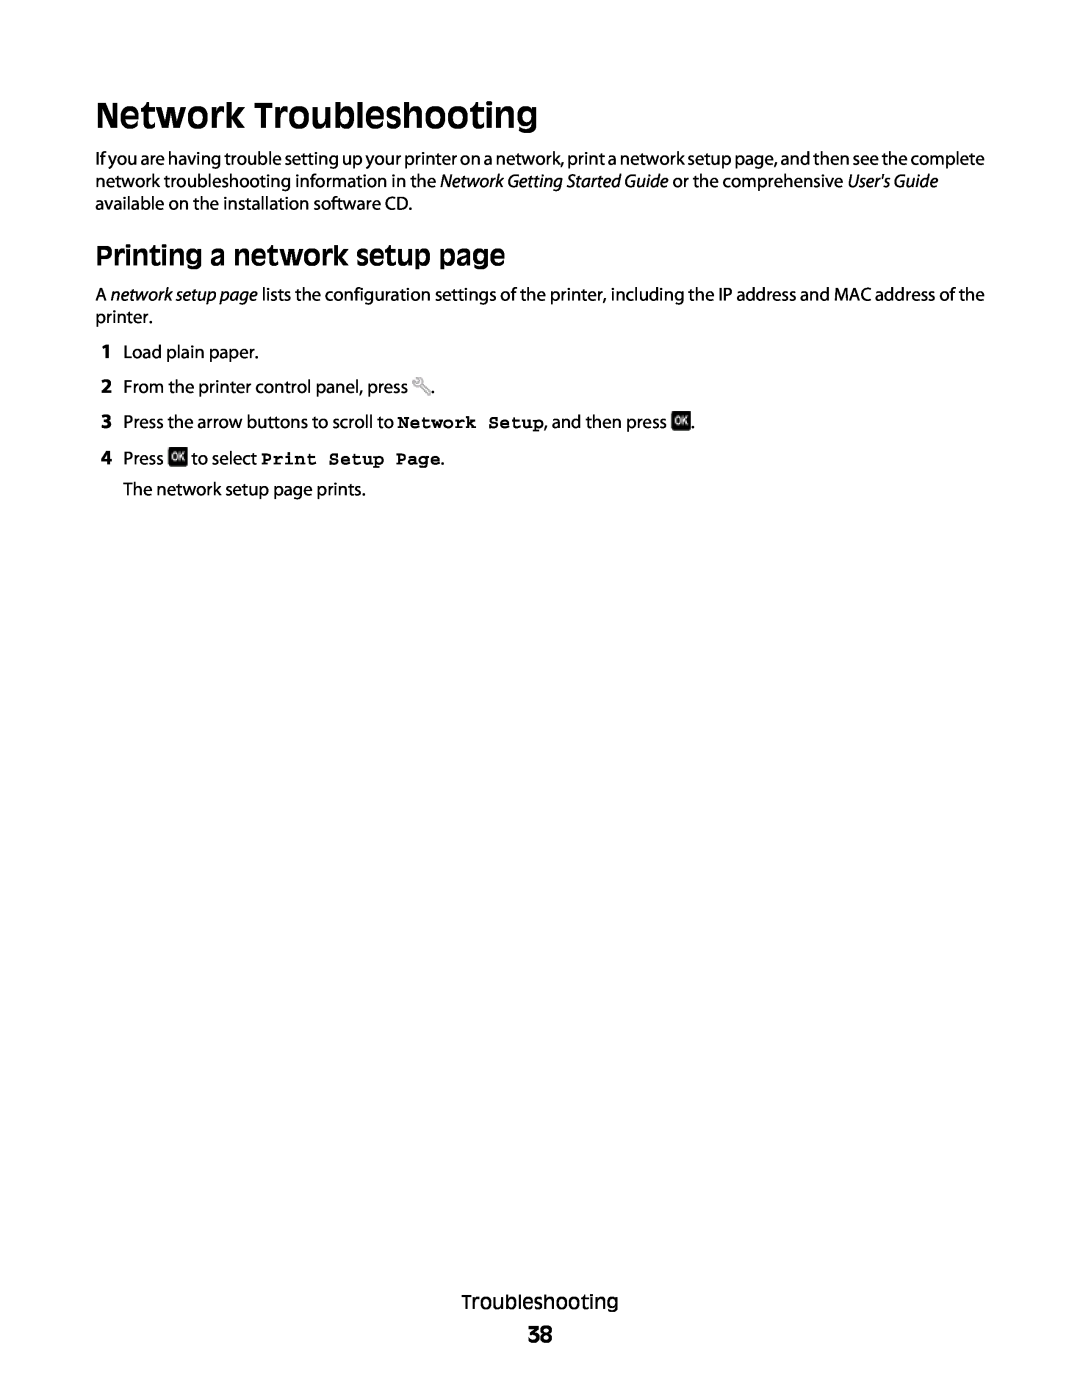 Lexmark S400 manual Network Troubleshooting, Printing a network setup page 